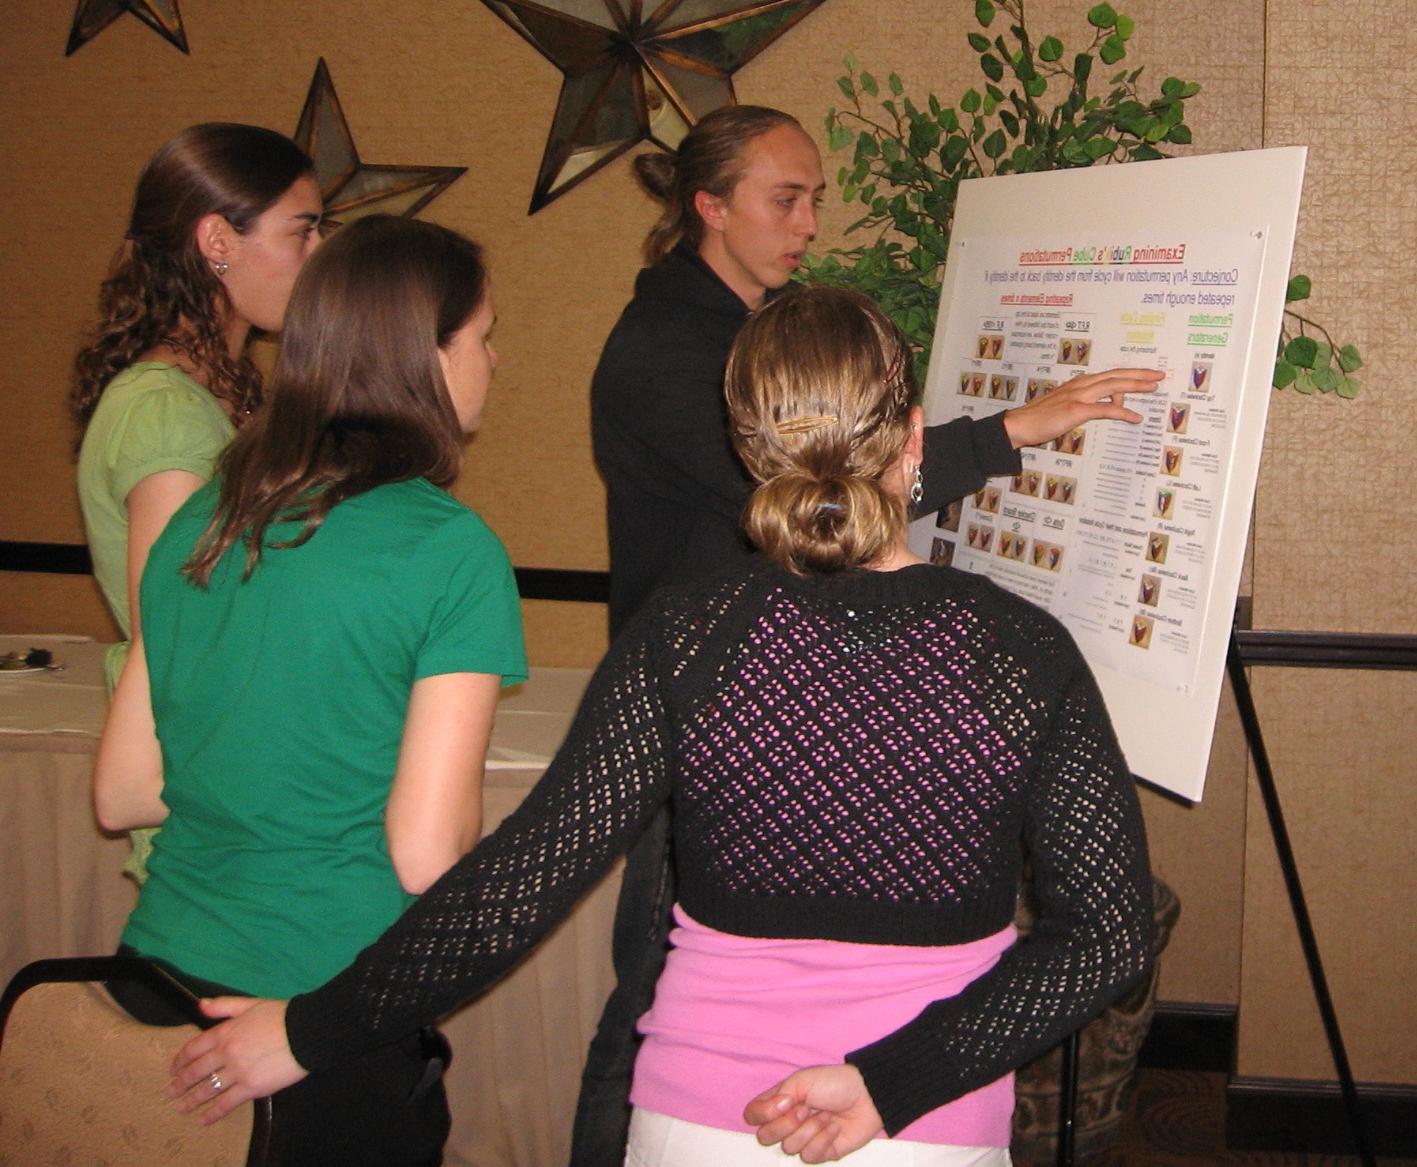 Student gives a presentation from a poster board while a small group watches